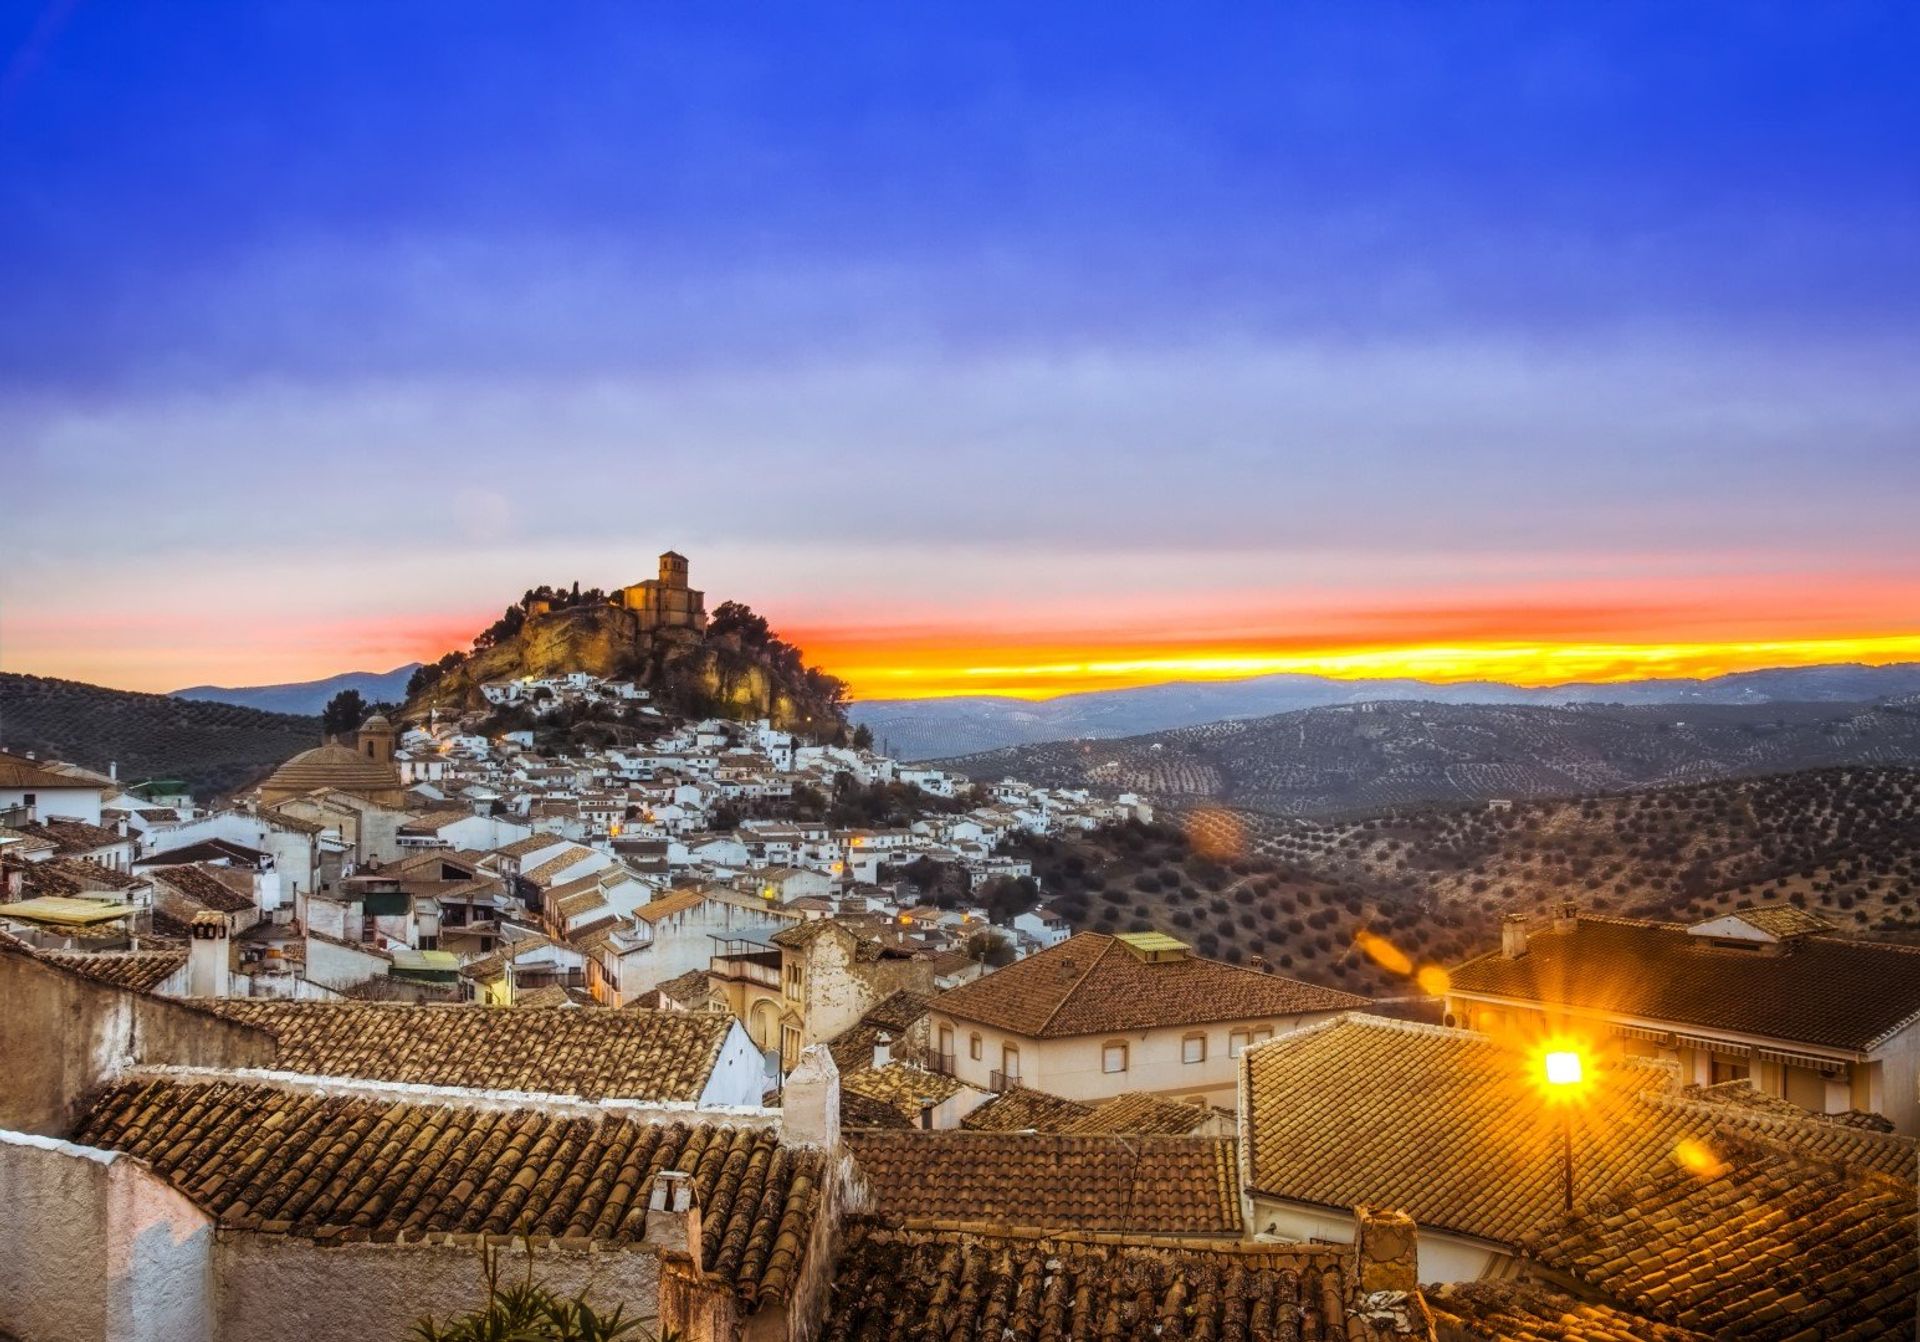 Beyond the rolling hills of Granada lie many picturesque white villages, or 'pueblo blancos'